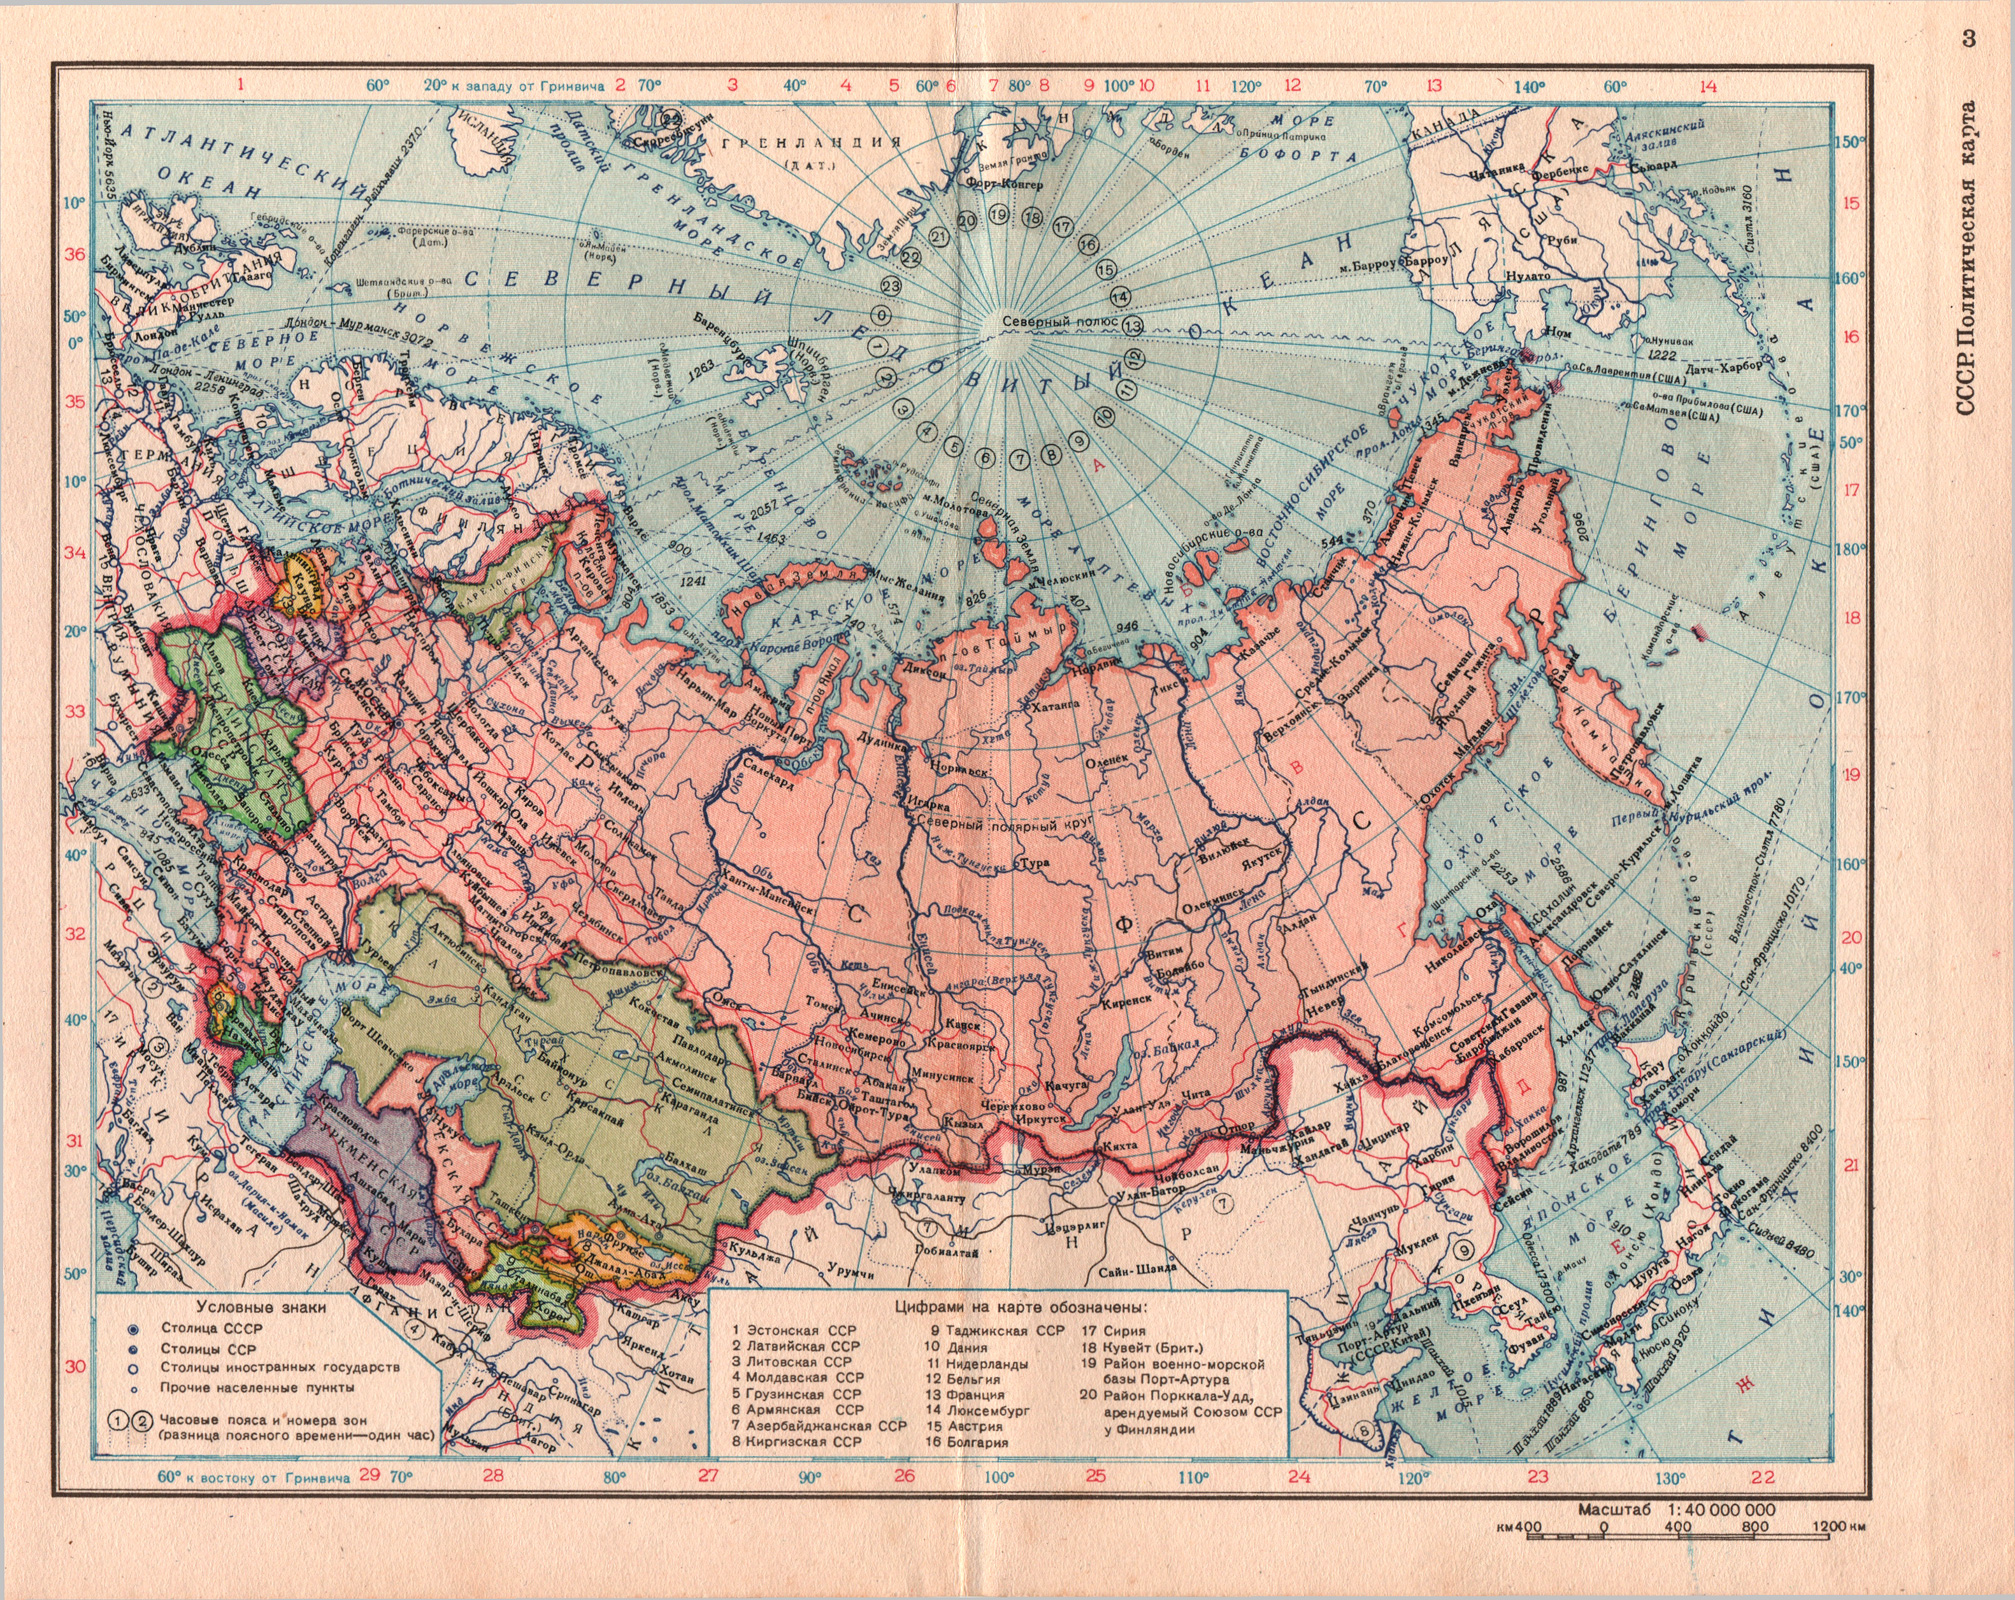 1947. Political map of the USSR